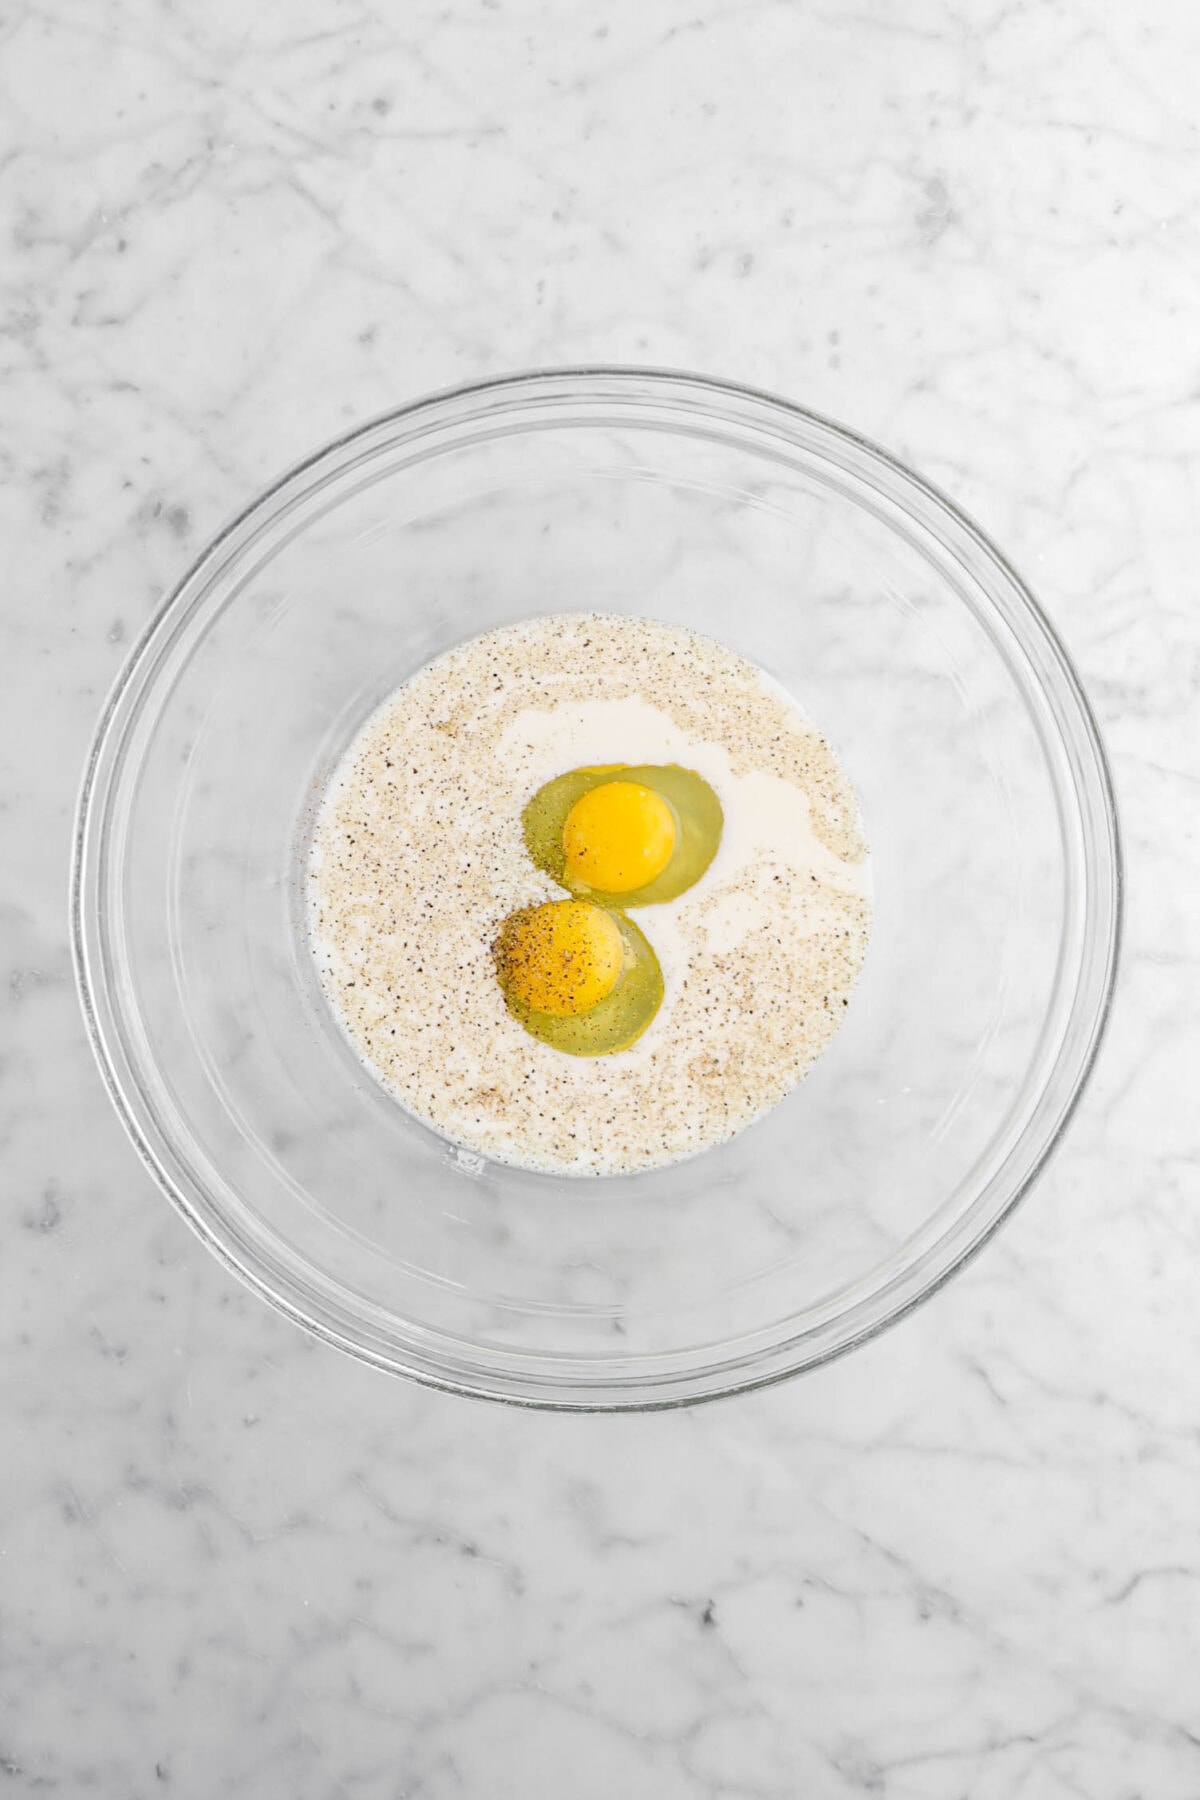 milk, pepper, and eggs in glass bowl